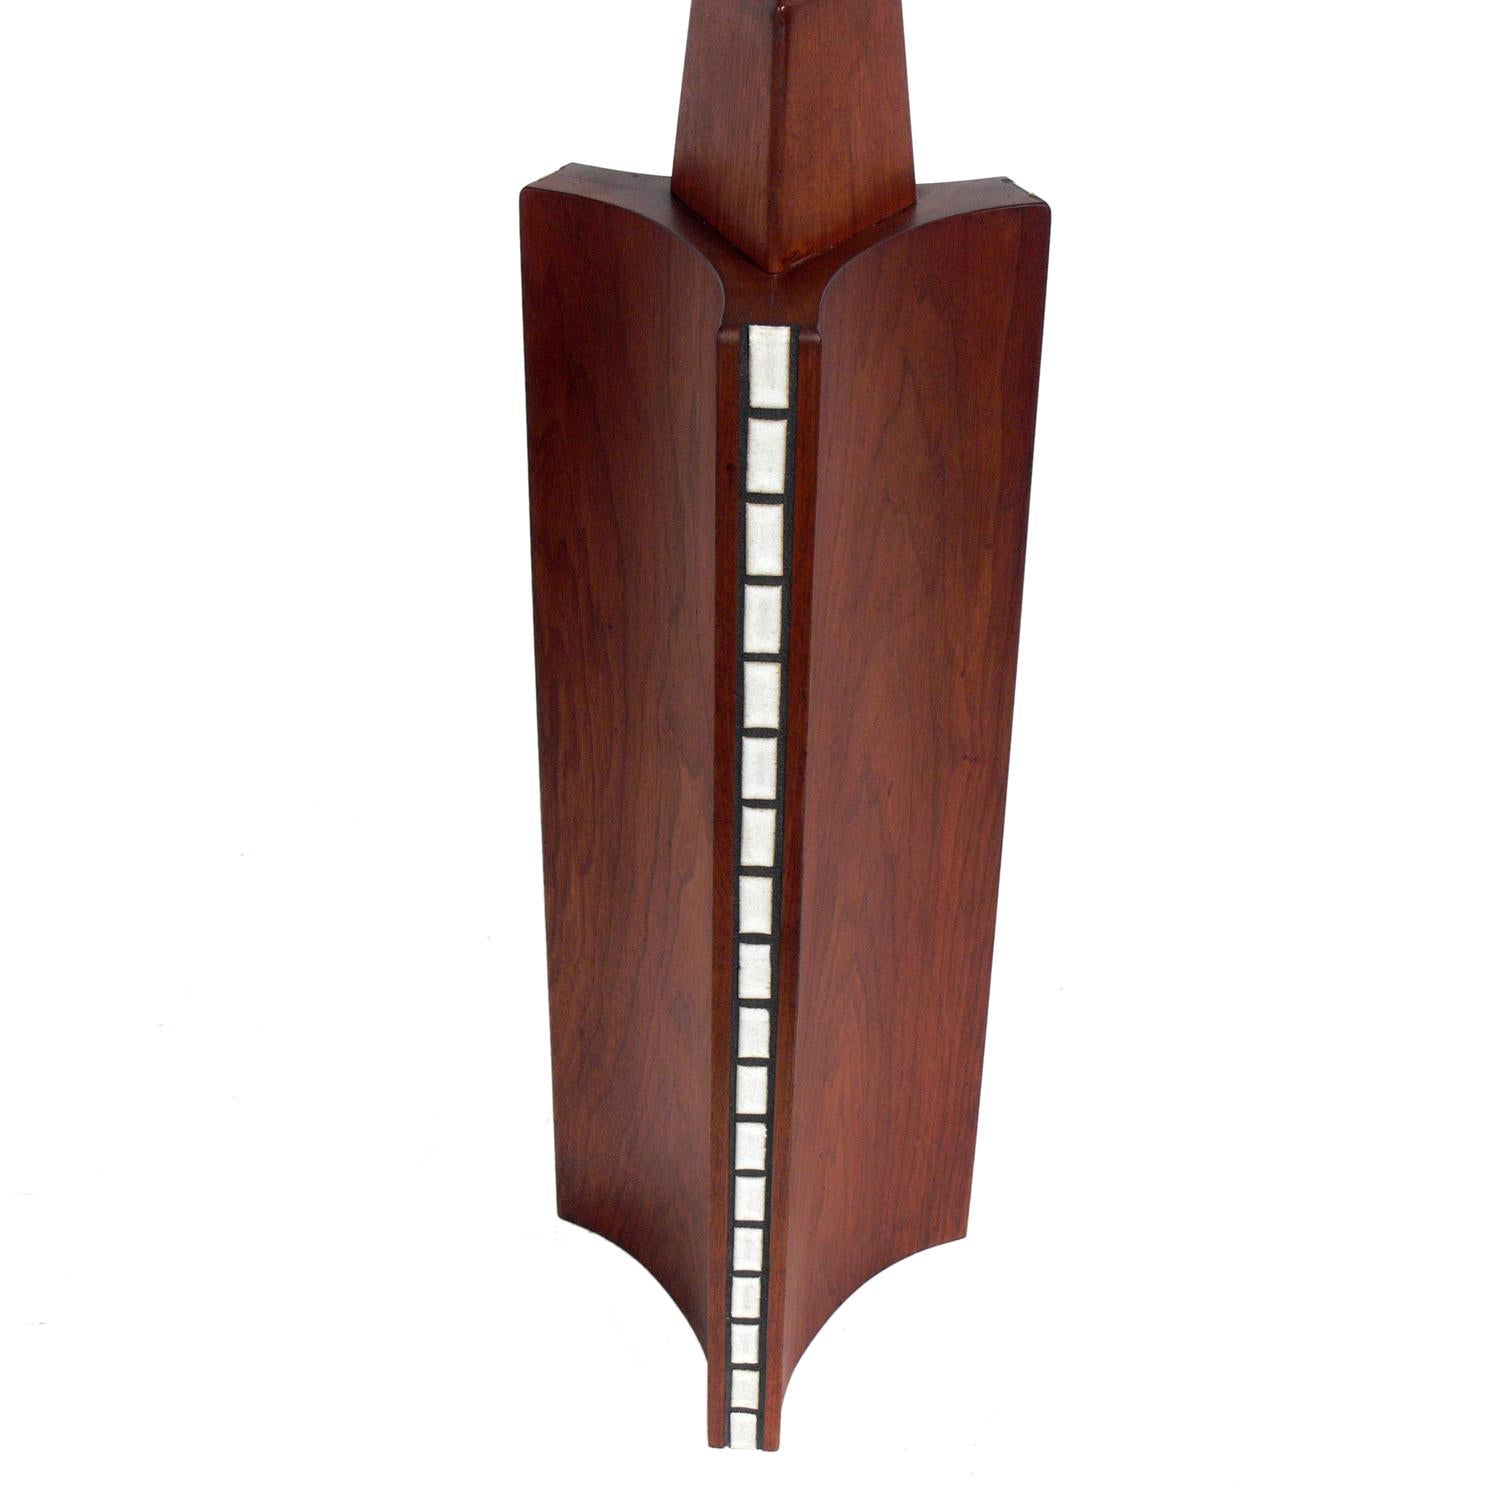 Large scale walnut and tile lamp, made by Gordon and Jane Martz, American, circa 1960s. The price noted below Includes the shade. Retains it's original walnut finial. Rewired and ready to use.